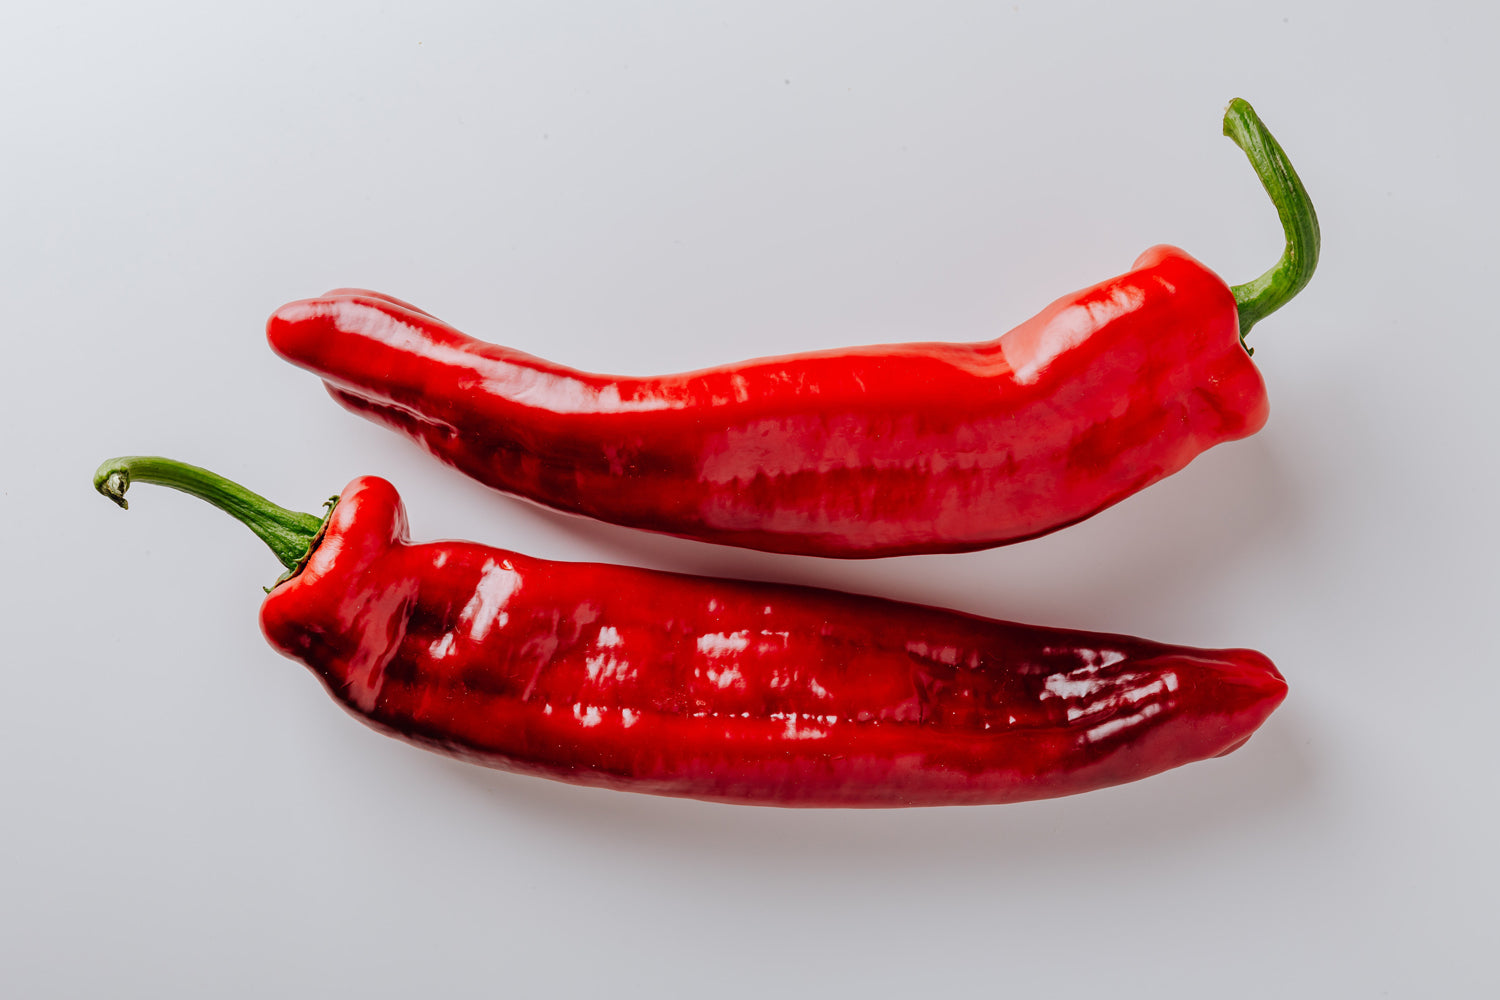 Is Red Chili Pepper, and How Hot Are They